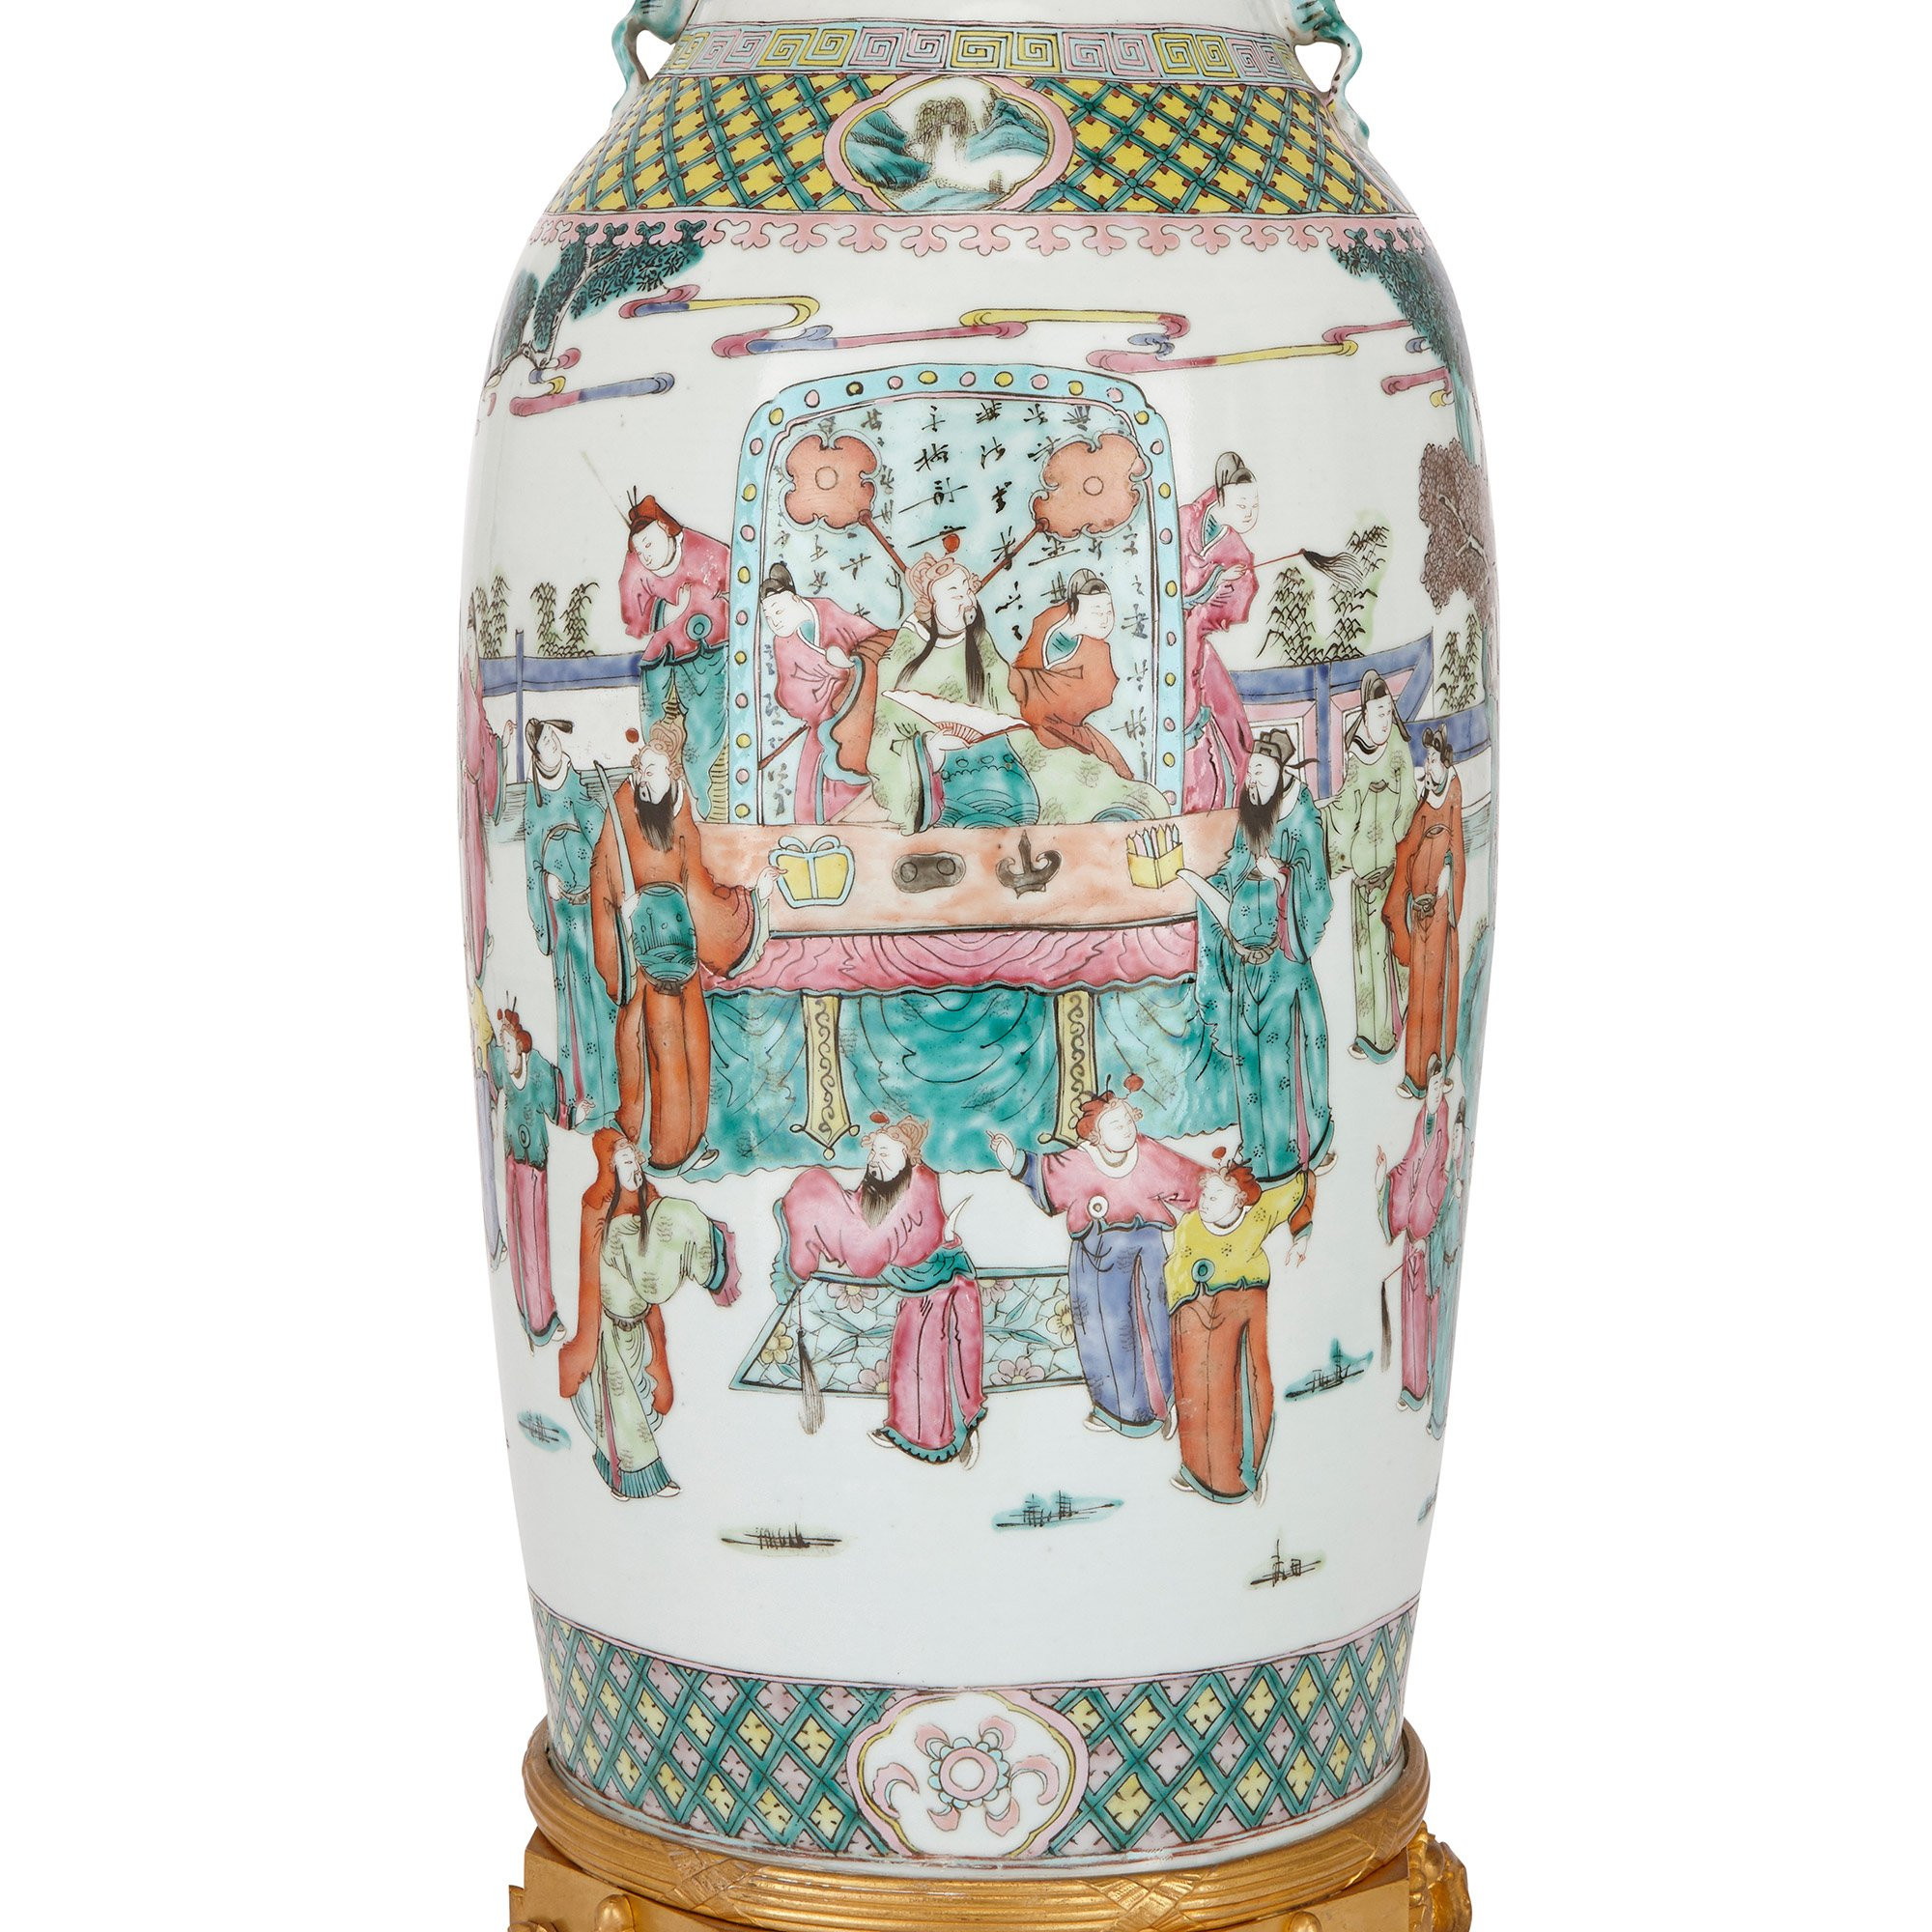 20 Fabulous Chinese Porcelain Vases for Sale 2022 free download chinese porcelain vases for sale of pair of chinese antique canton famille rose porcelain vases for sale pertaining to pair of chinese antique canton famille rose porcelain vases for sale at